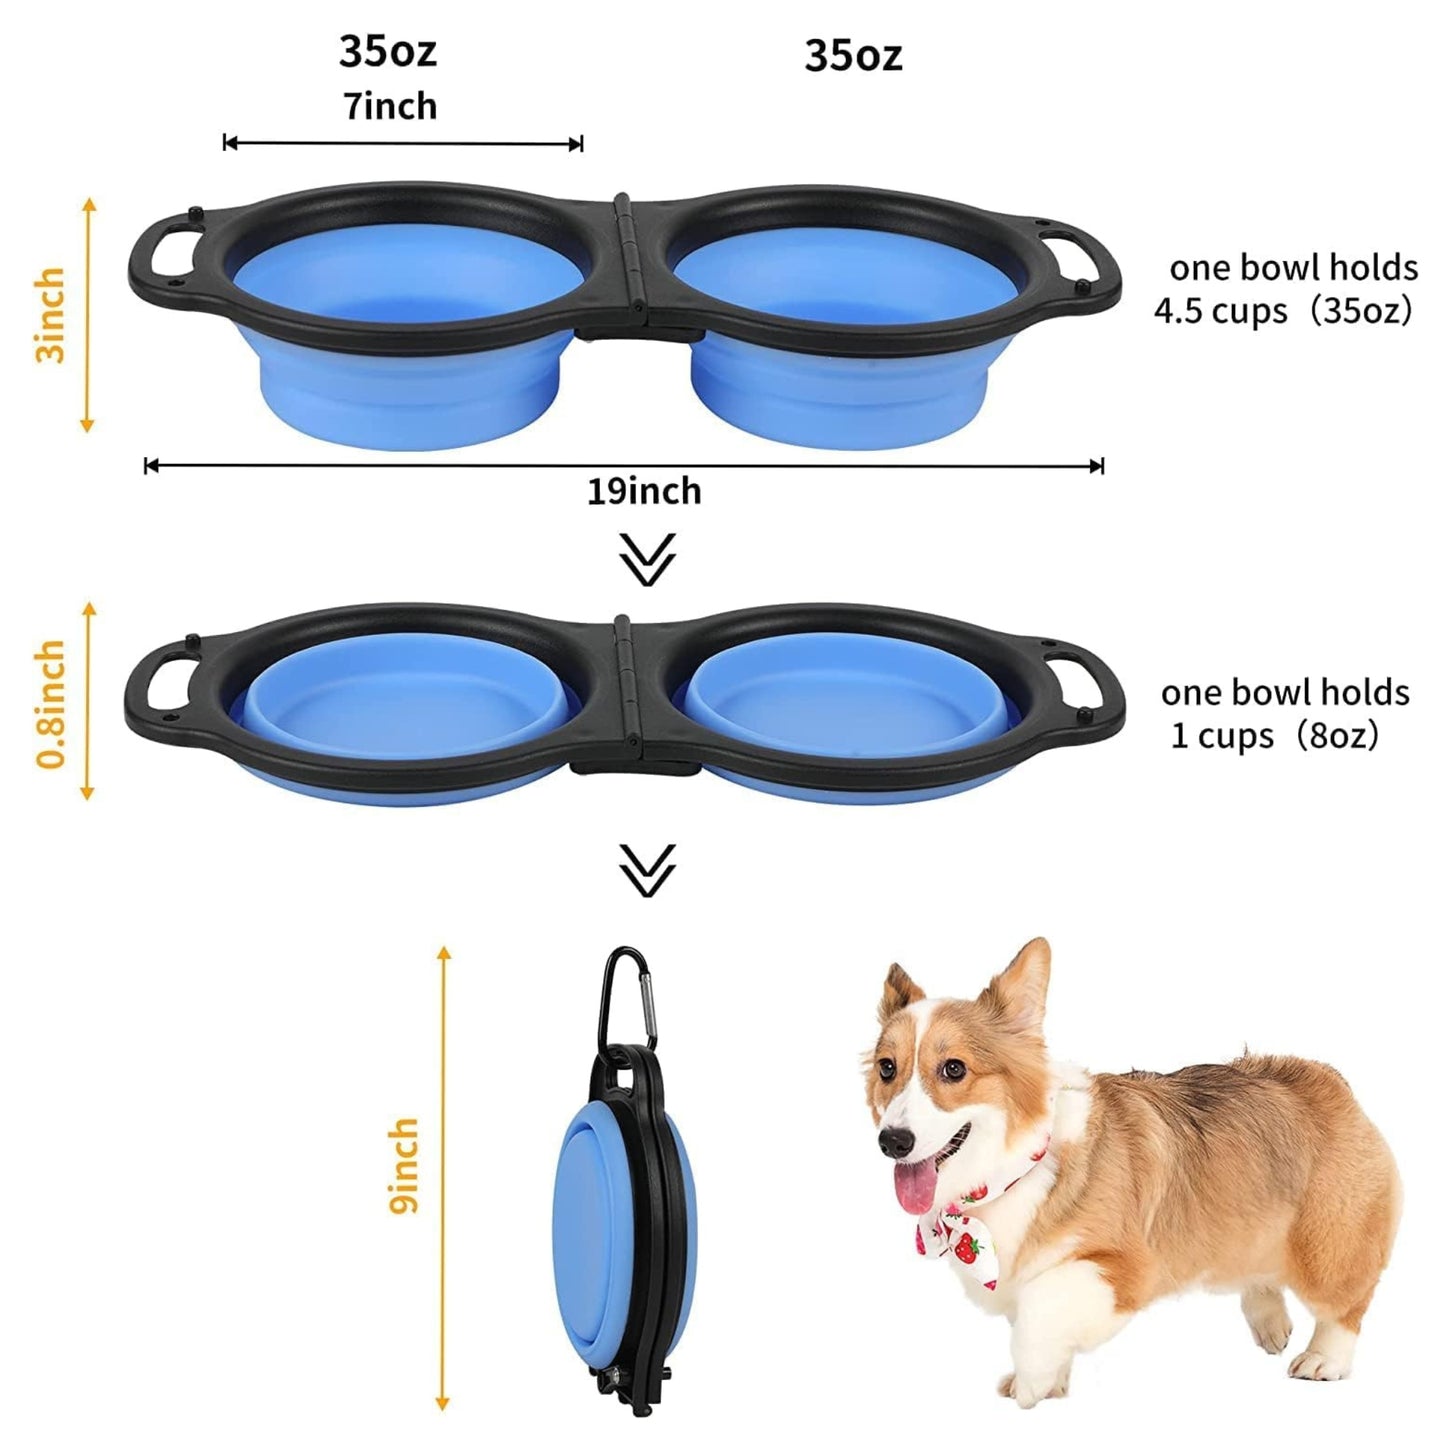 Foodie Puppies 2-in-1 Foldable Silicone Dual Pop-Up Bowl